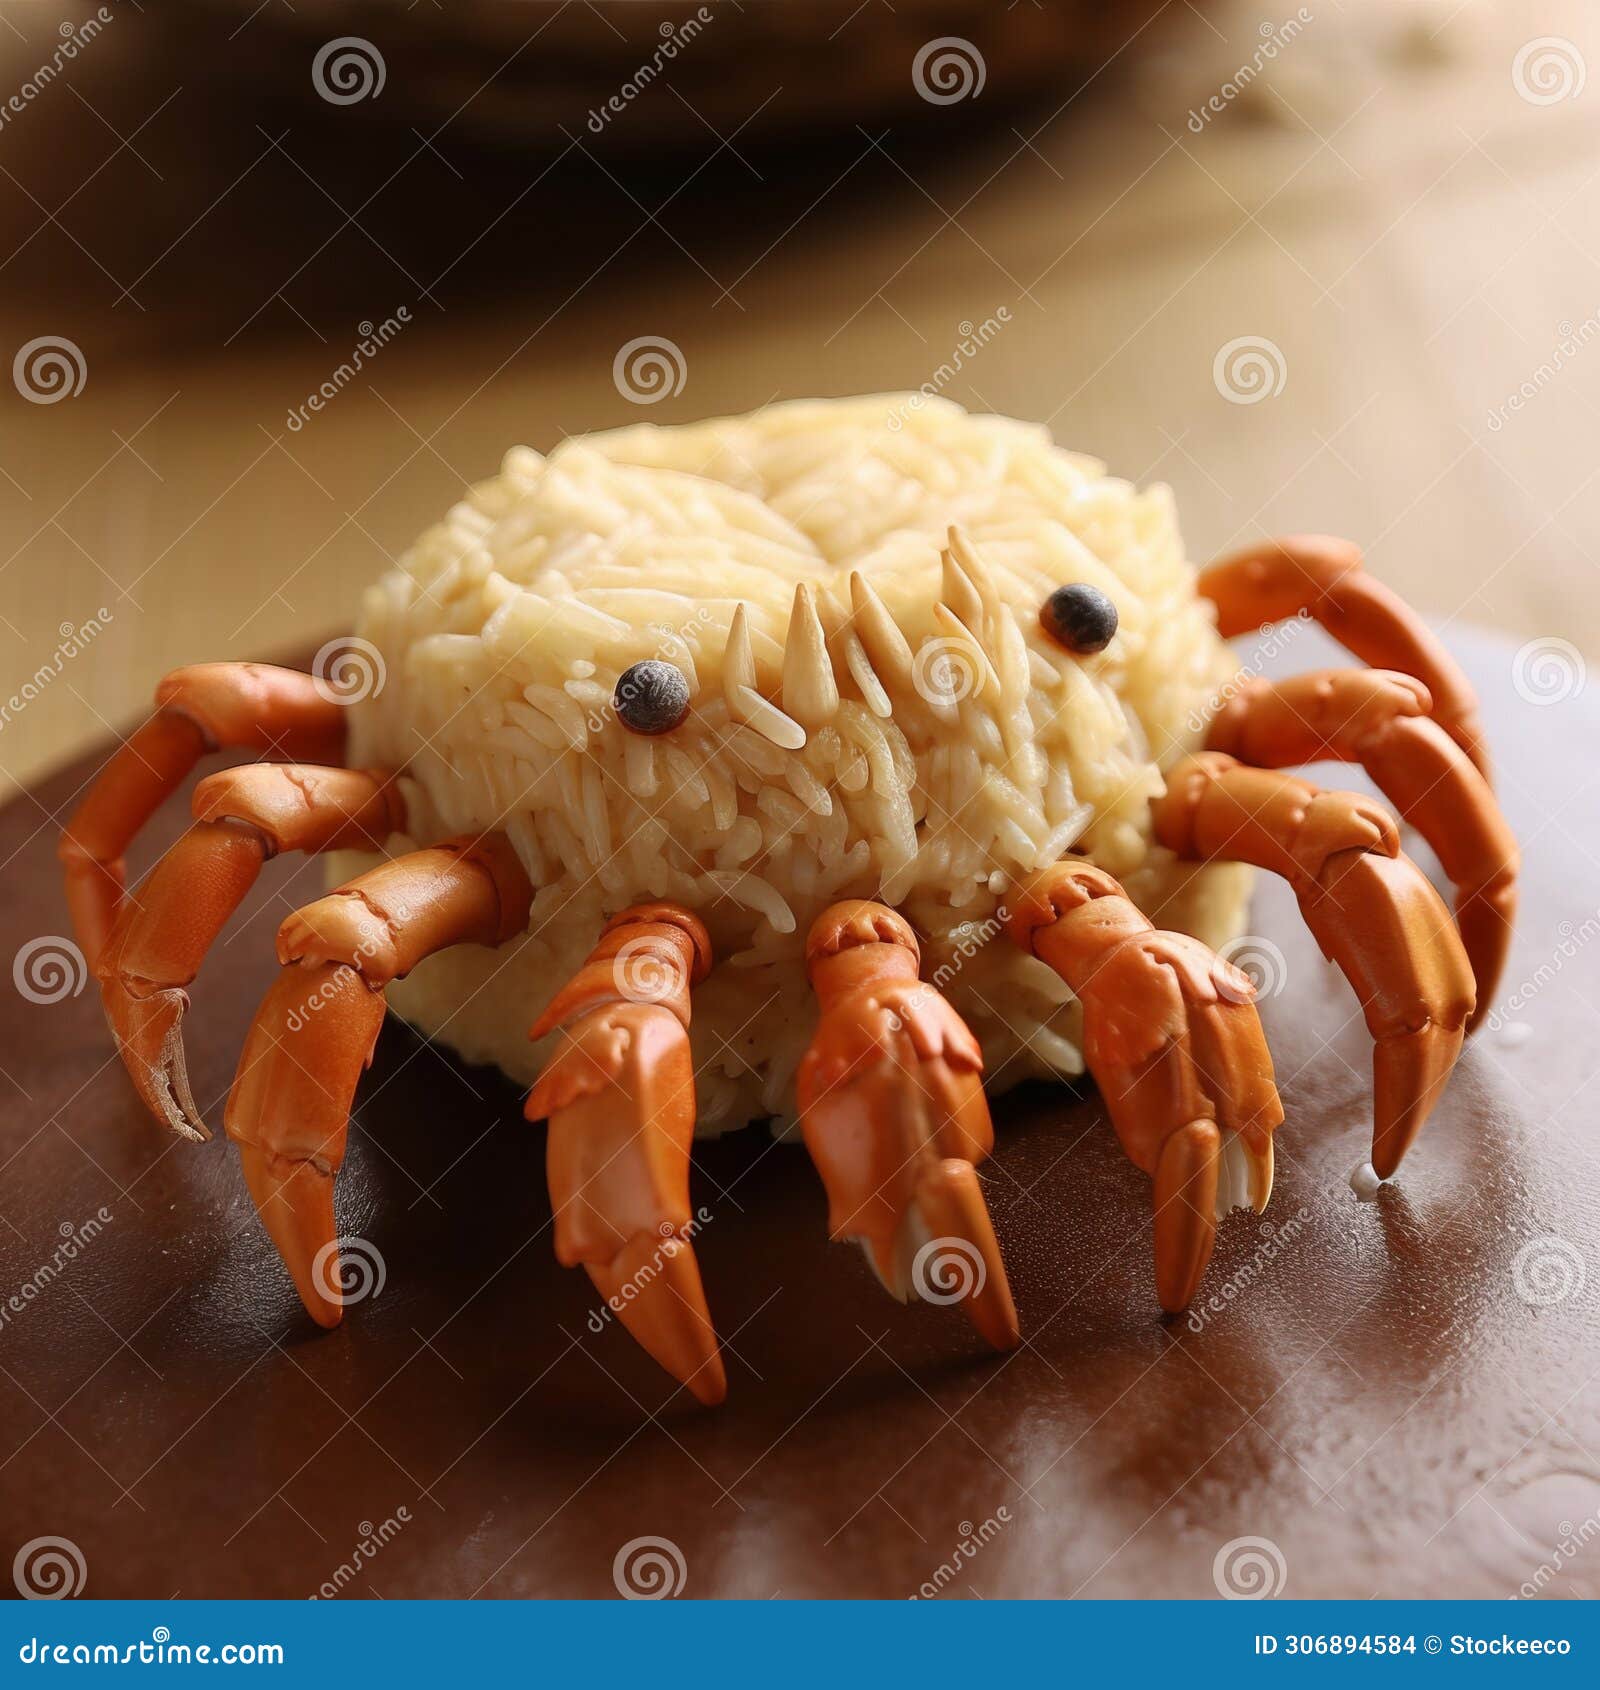 crab cookies: rice-based treats with national geographic style